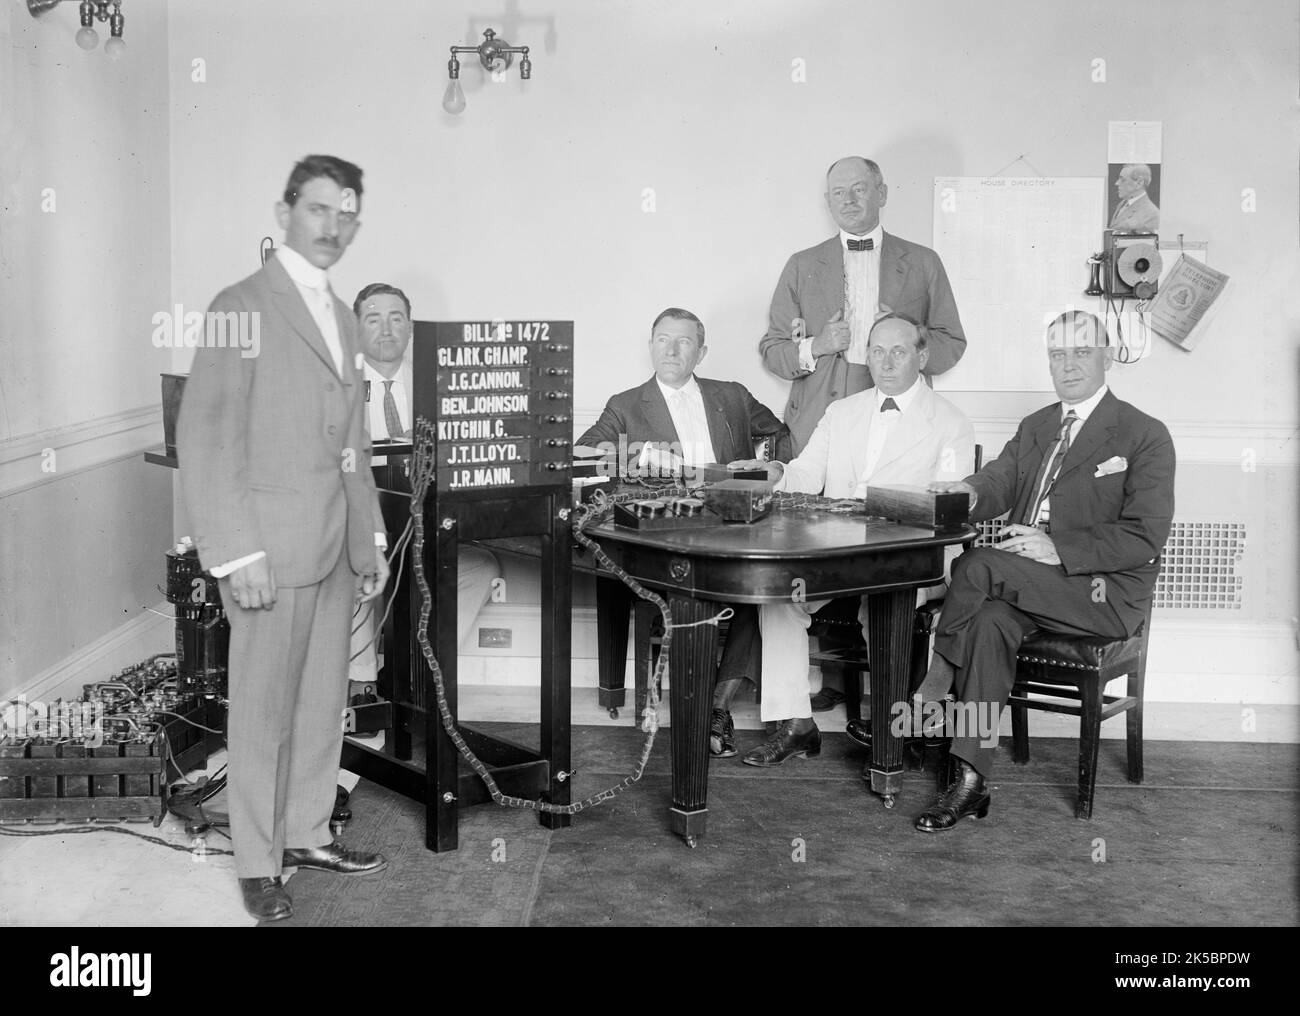 Bobroff Voting Machine - Being Considered For Use In House, 1917. Standing right to left: Representatives Jacoway; Caraway; and Britten. Sign reads: 'Bill no. 1472 - Clark, Champ [James Beauchamp Clark]; J.G. Cannon; Ben. Johnson; Kitchin, C.; J.T. Lloyd; J.R. Mann'. To the right of the sign are seated US politicians Frederick Albert Britten, Thaddeus Horatius Caraway and Henderson Madison Jacoway. Stock Photo